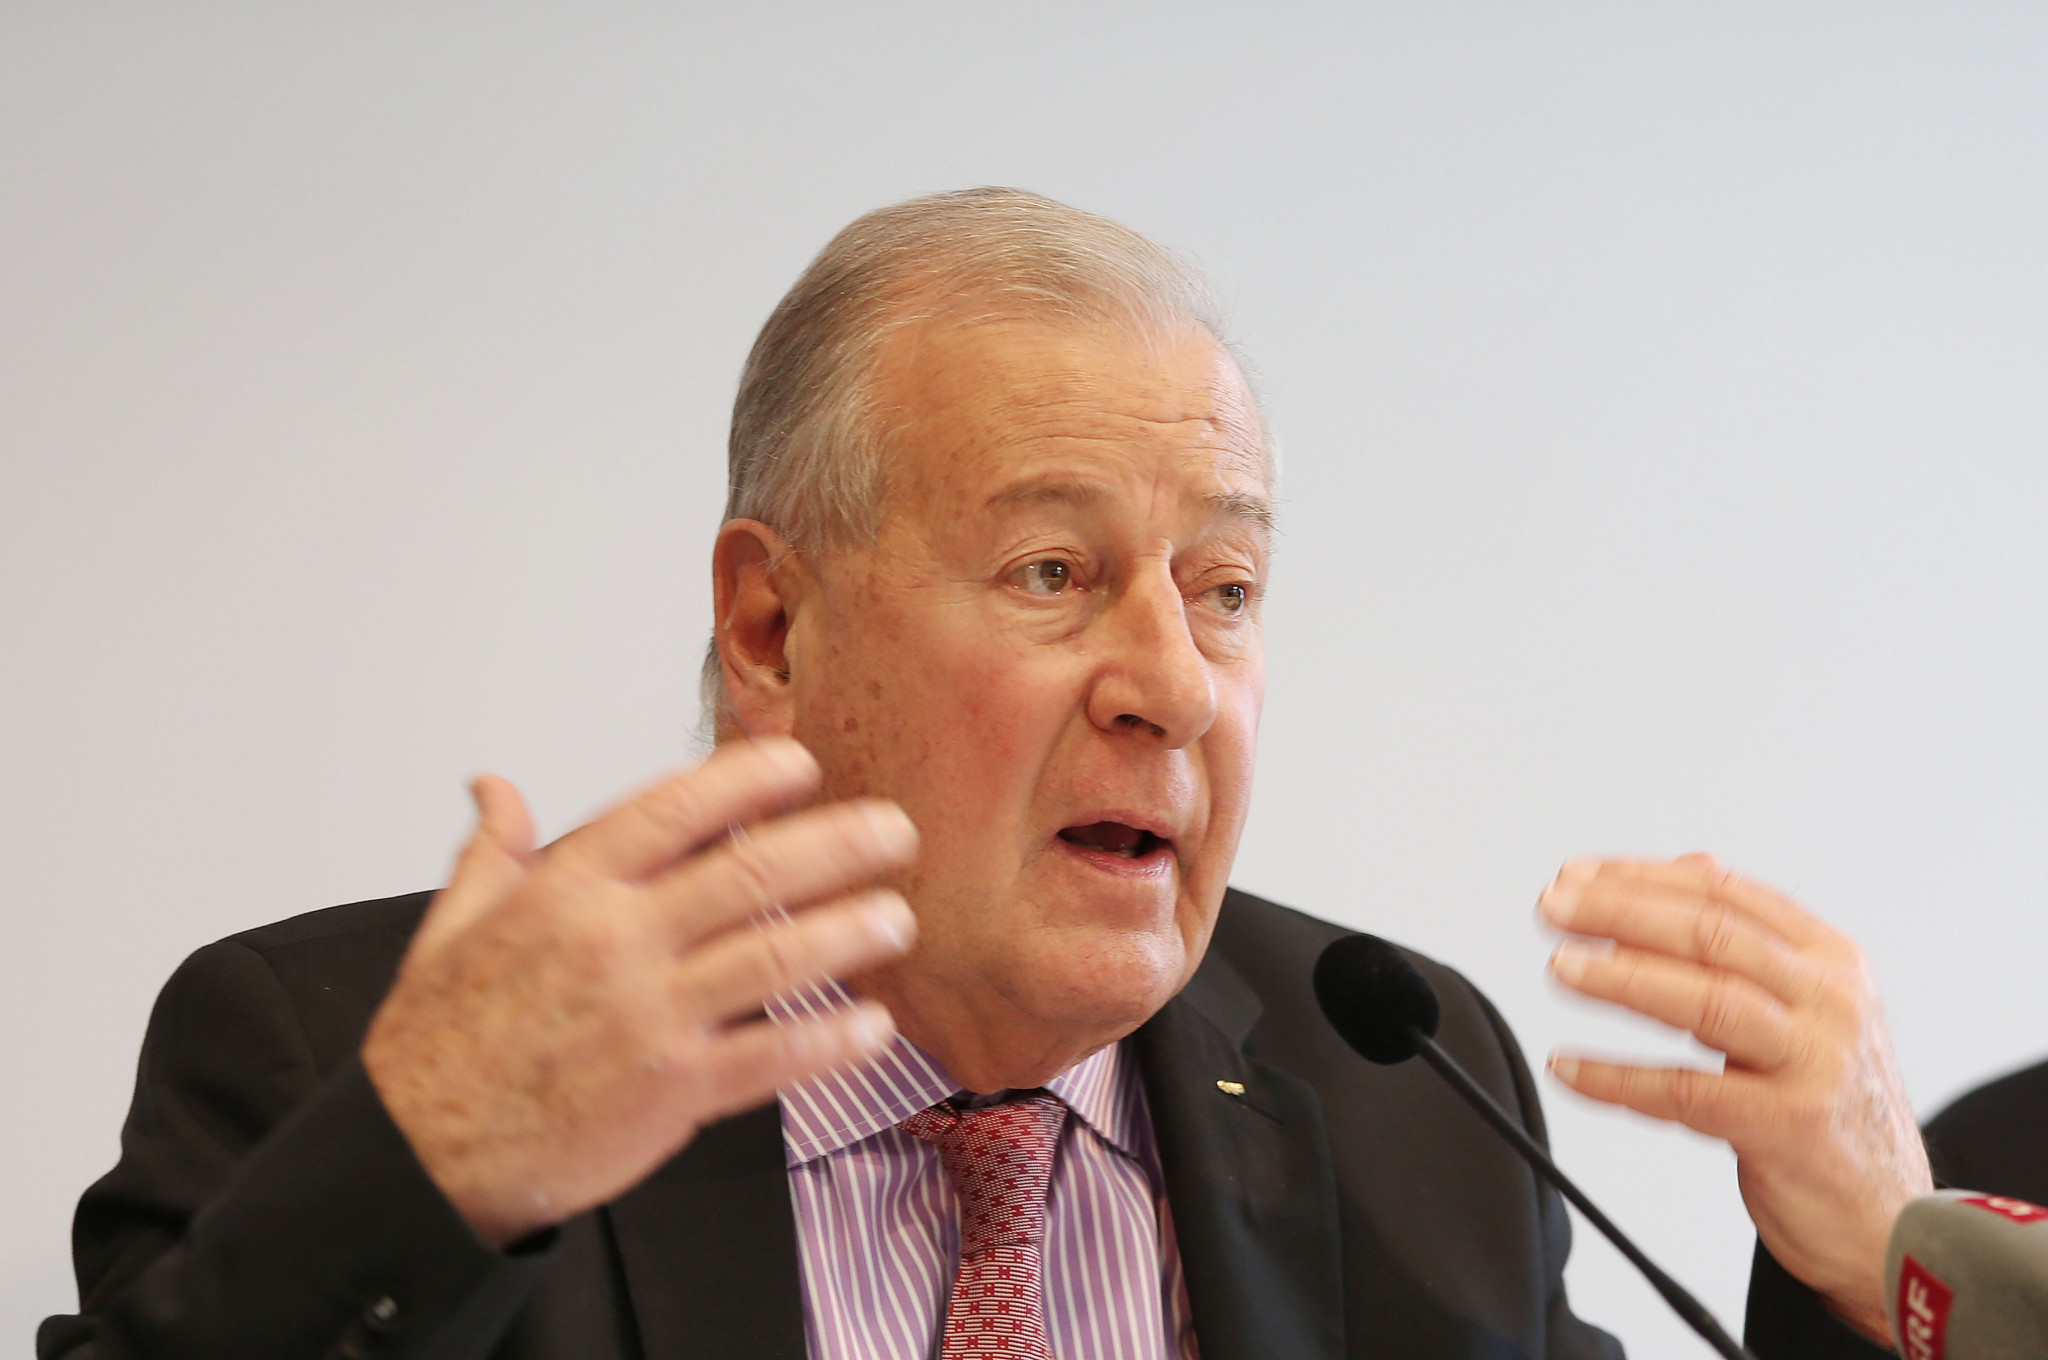 Bach leads tributes to former IOC director general Carrard